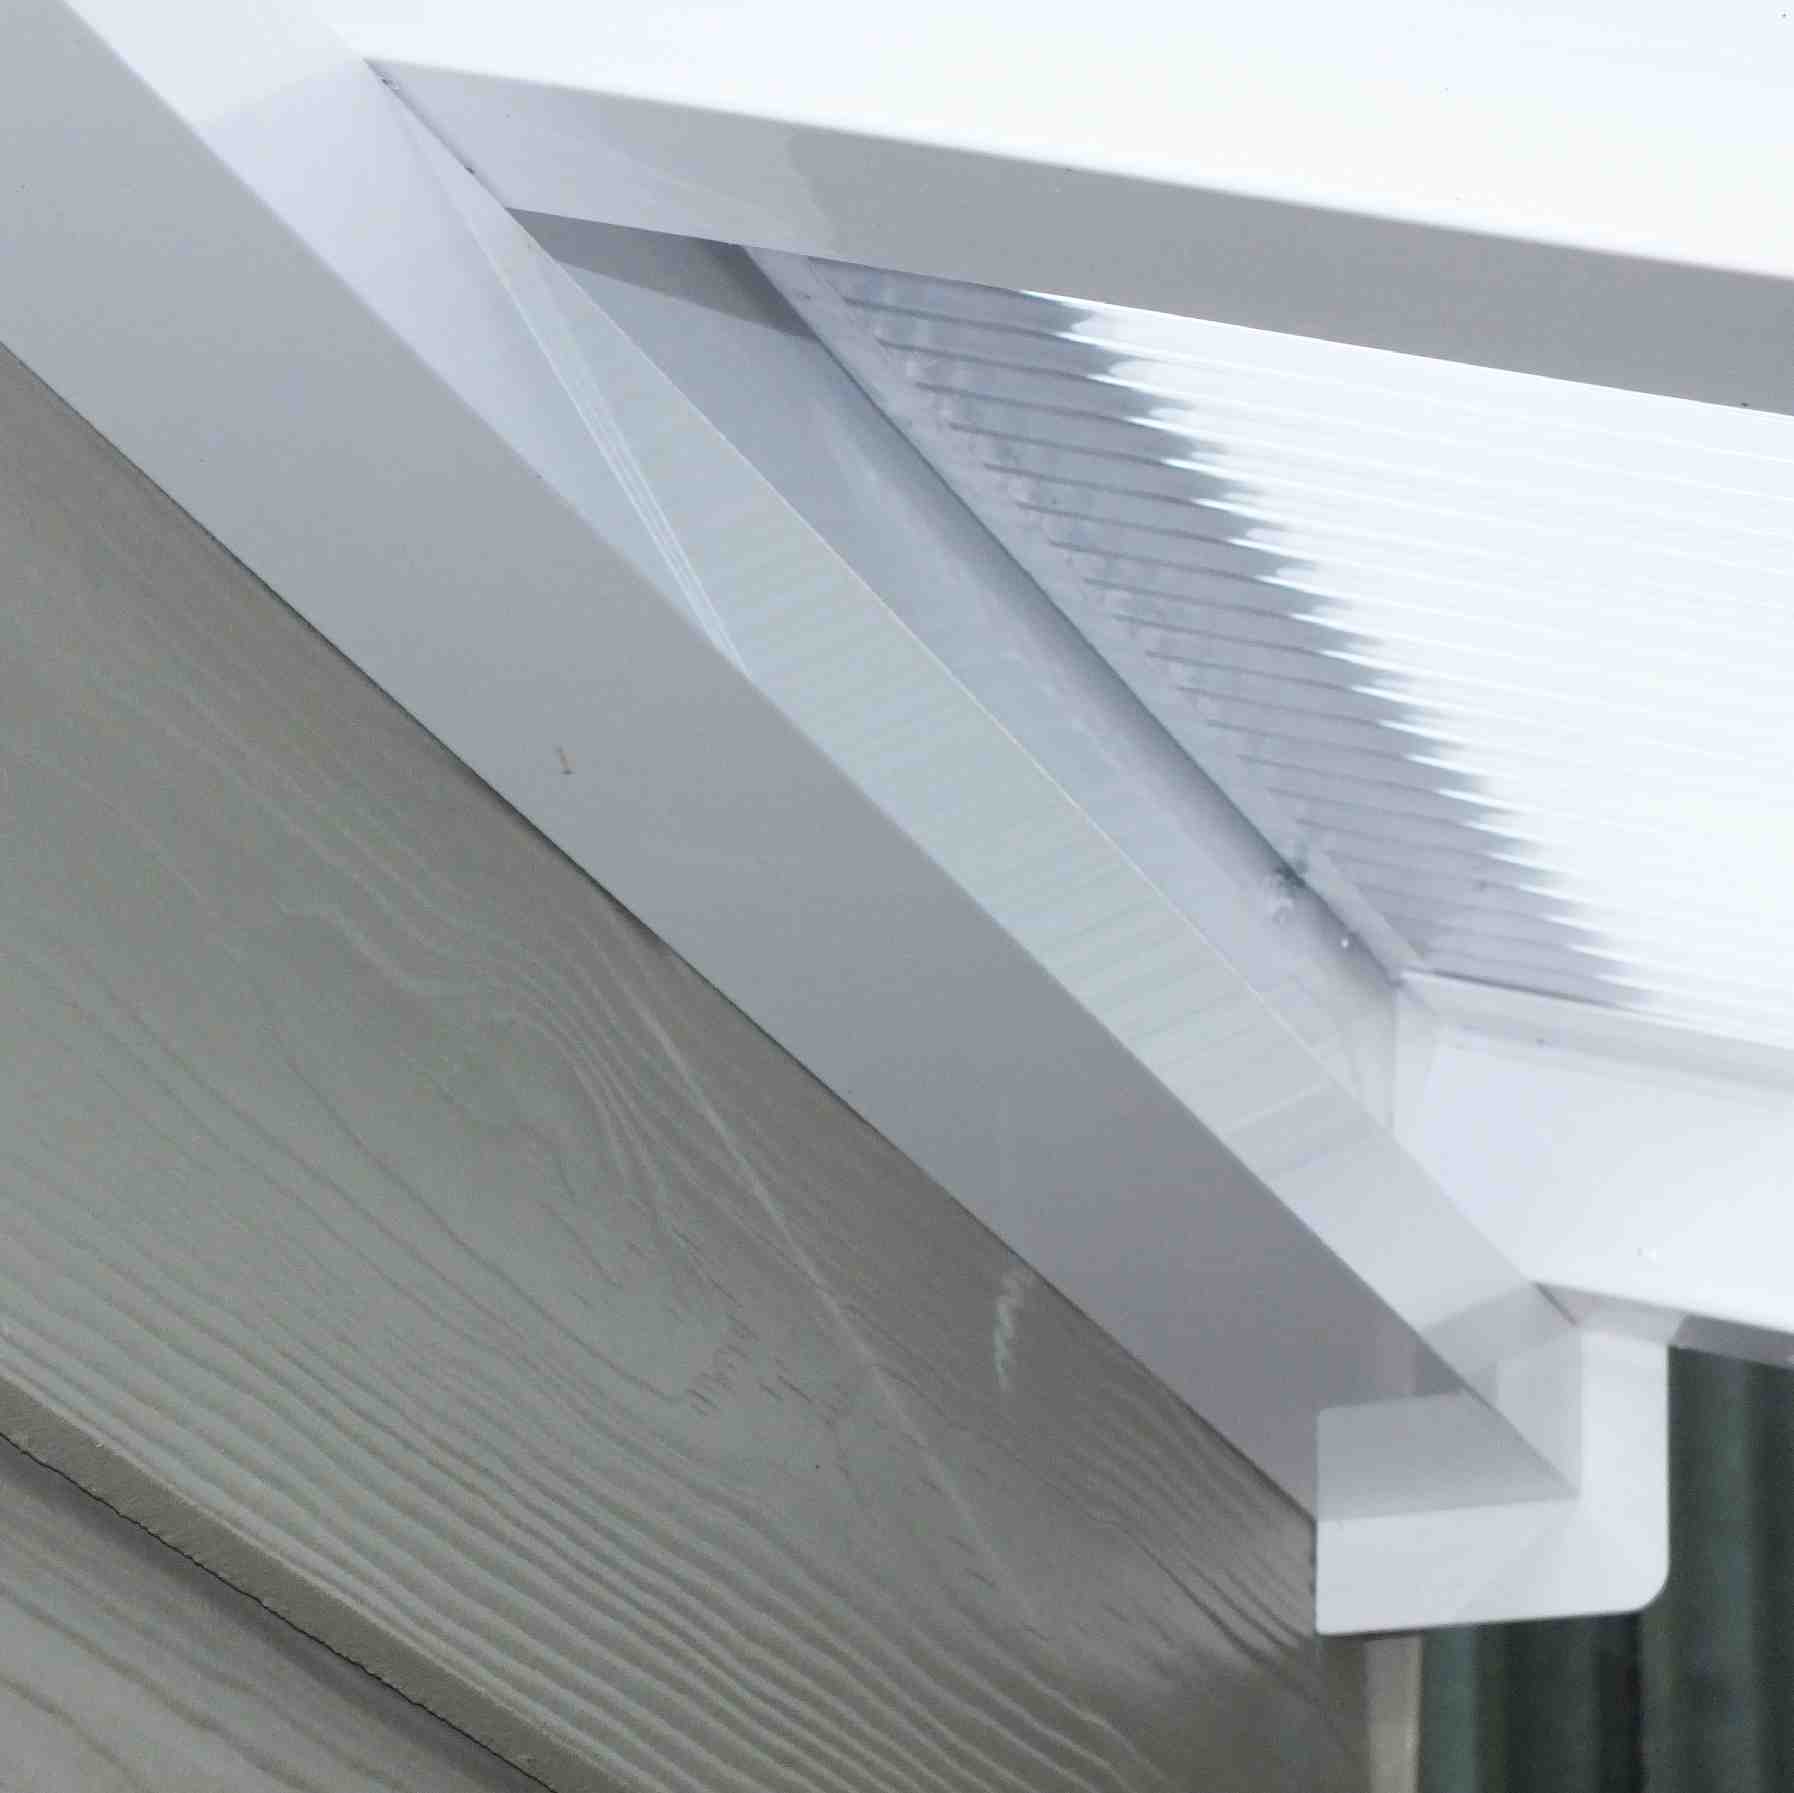 Great deals on Omega Verandah White with 16mm Polycarbonate Glazing - 7.8m (W) x 4.0m (P), (4) Supporting Posts